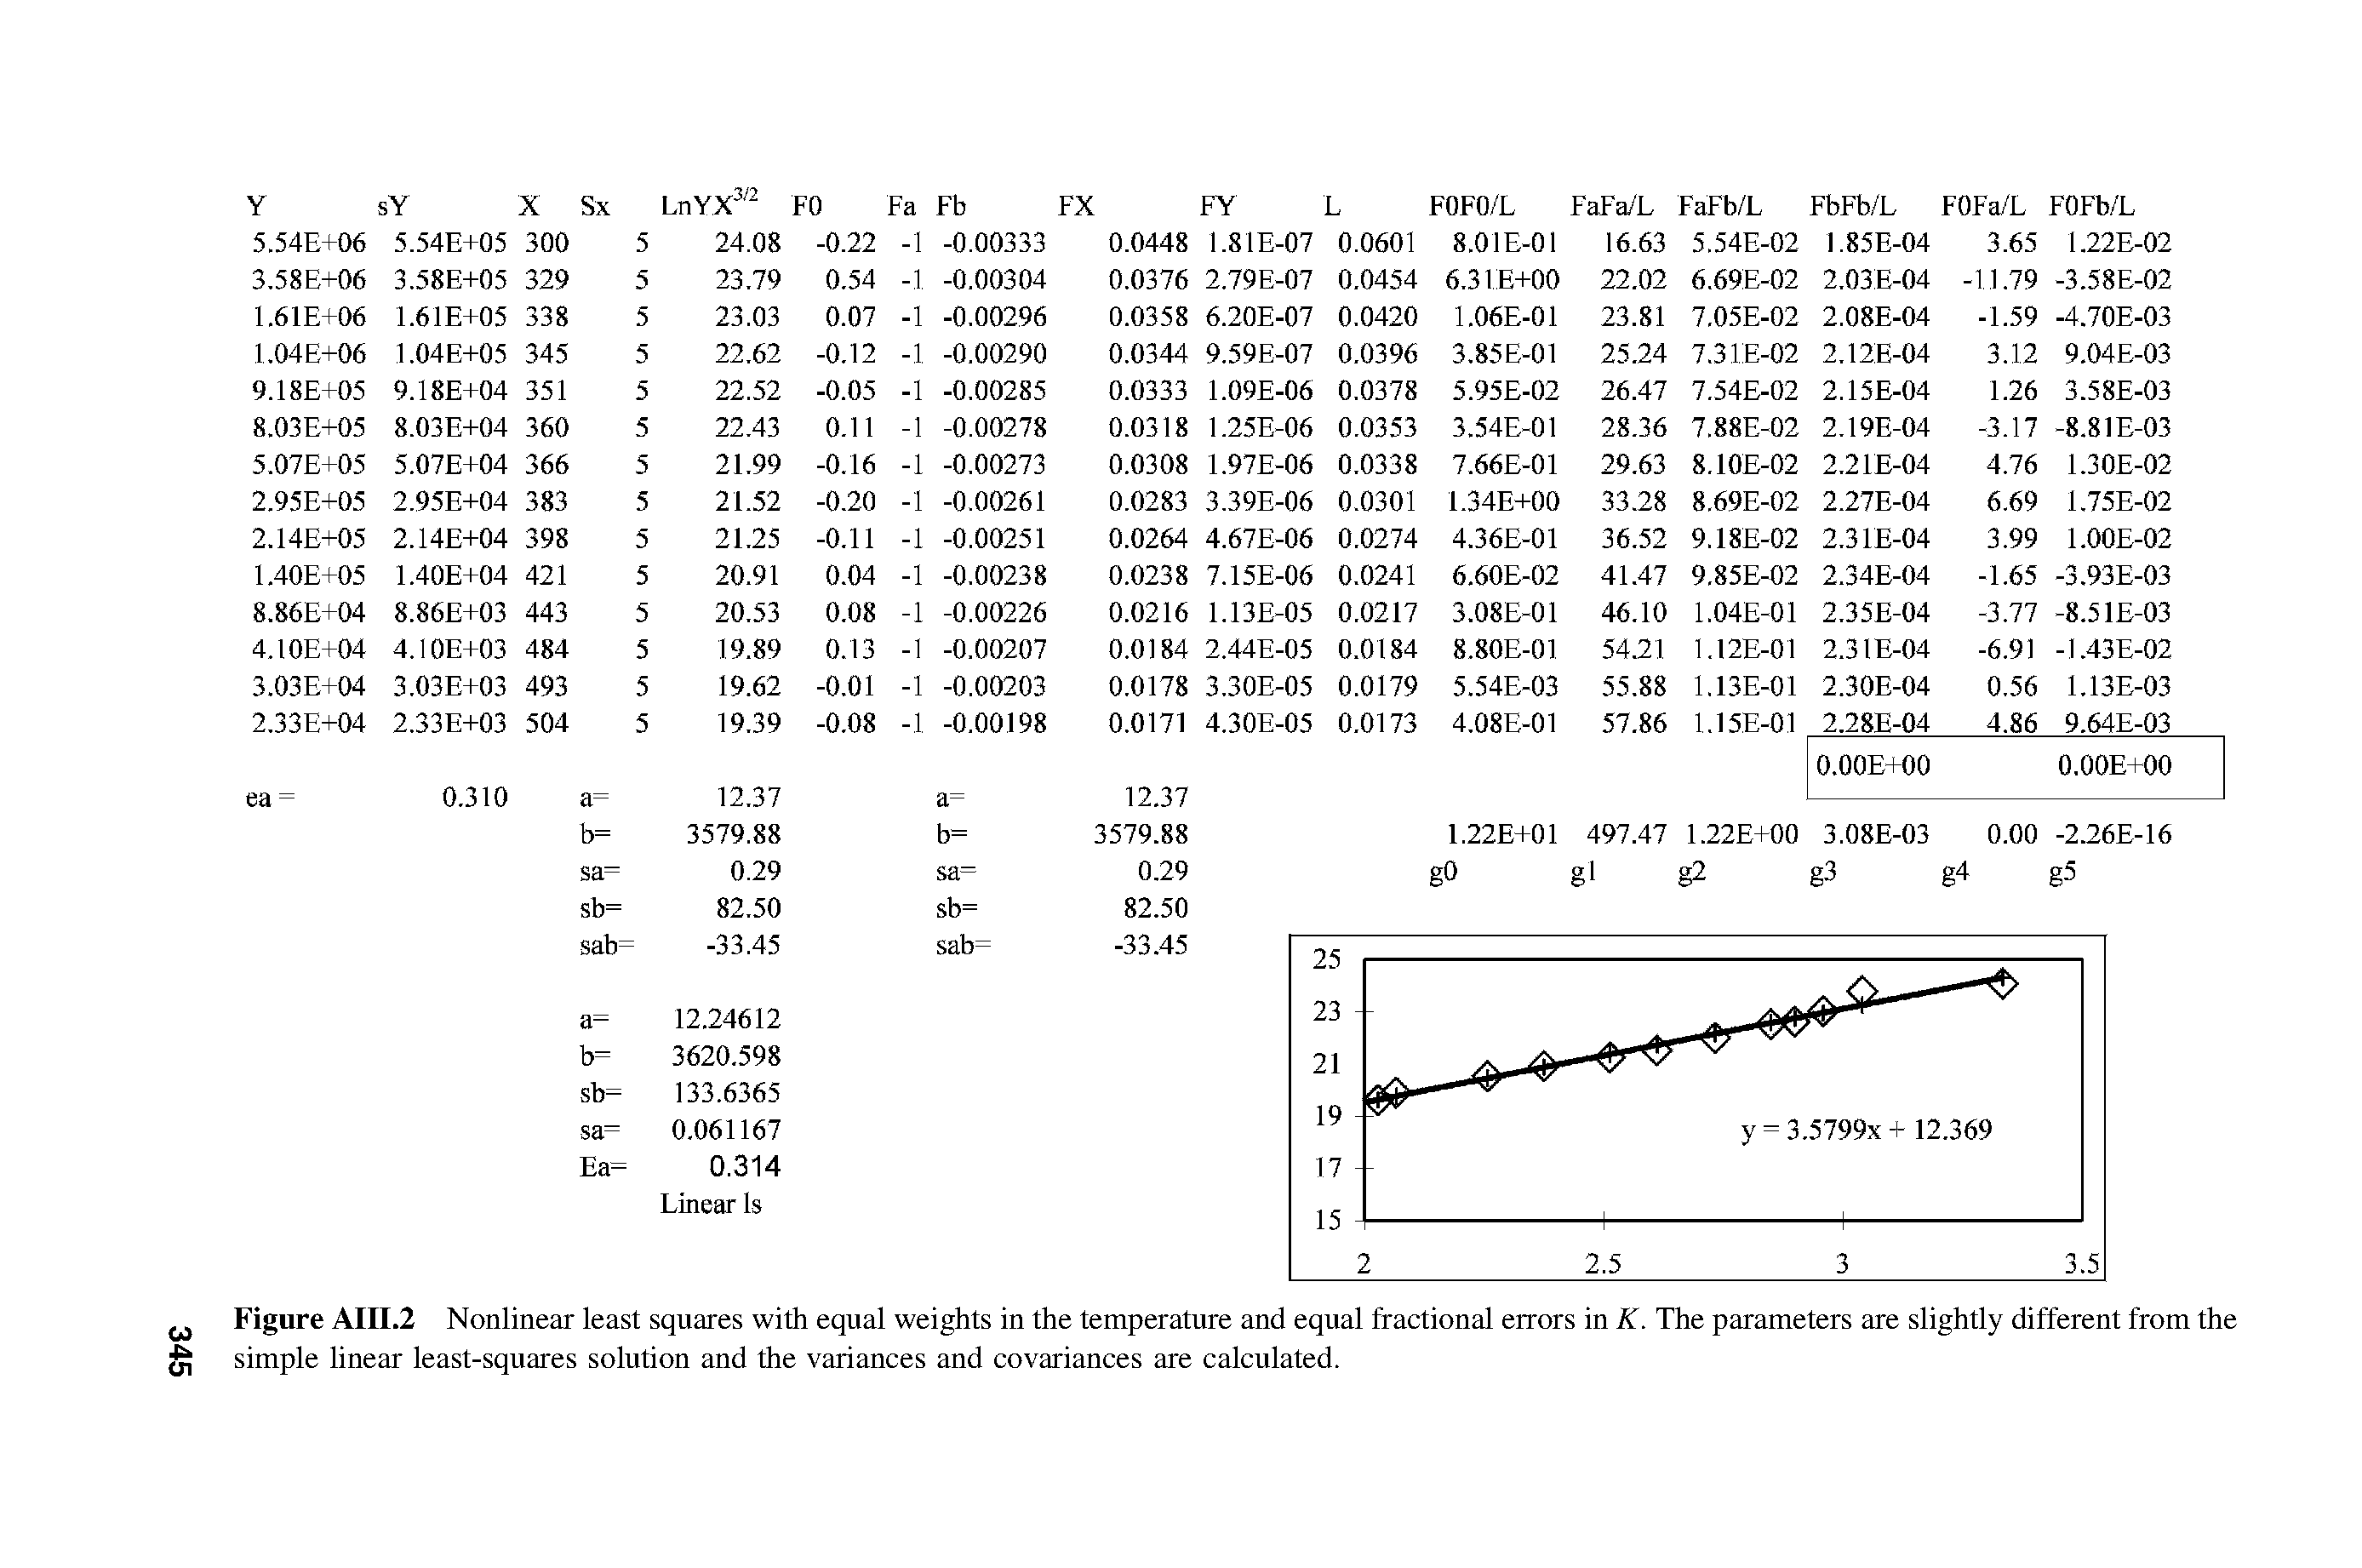 Figure AIII.2 Nonlinear least squares with equal weights in the temperature and equal fractional errors in K. The parameters are slightly different from the simple linear least-squares solution and the variances and covariances are calculated.